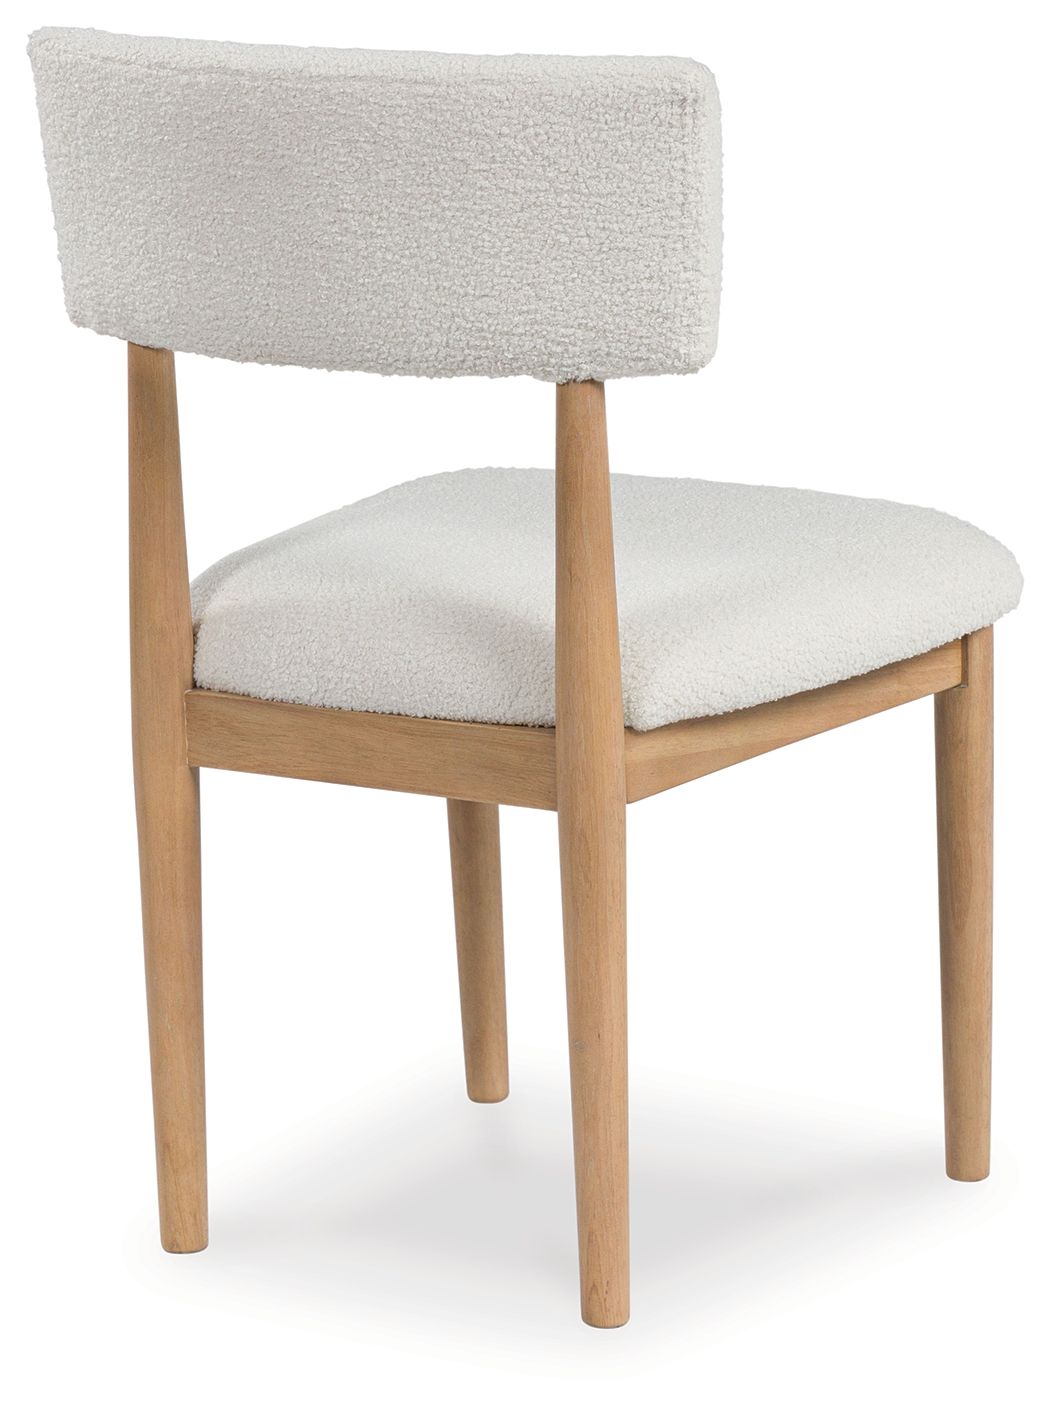 Sawdyn - White / Light Brown - Dining Upholstered Side Chair (Set of 2)